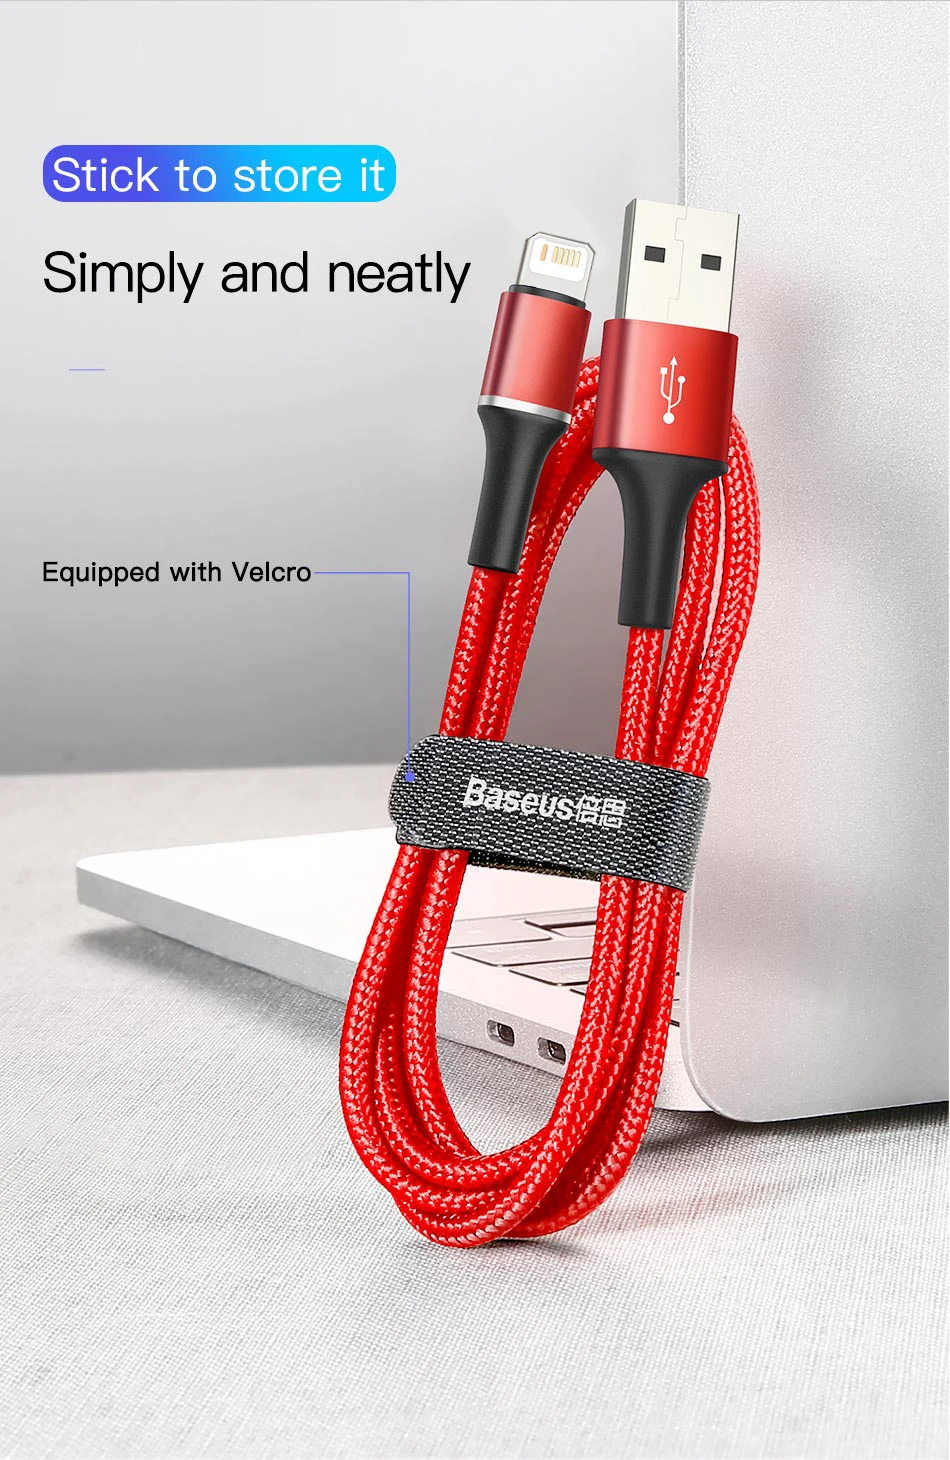 Baseus LED USB Cable For iPhone 13 12 11 Pro Xs Max X Xr 8 7 6 Fast Charging Charger Mobile Phone Data Cable For iPad Wire Cord phone charger cord